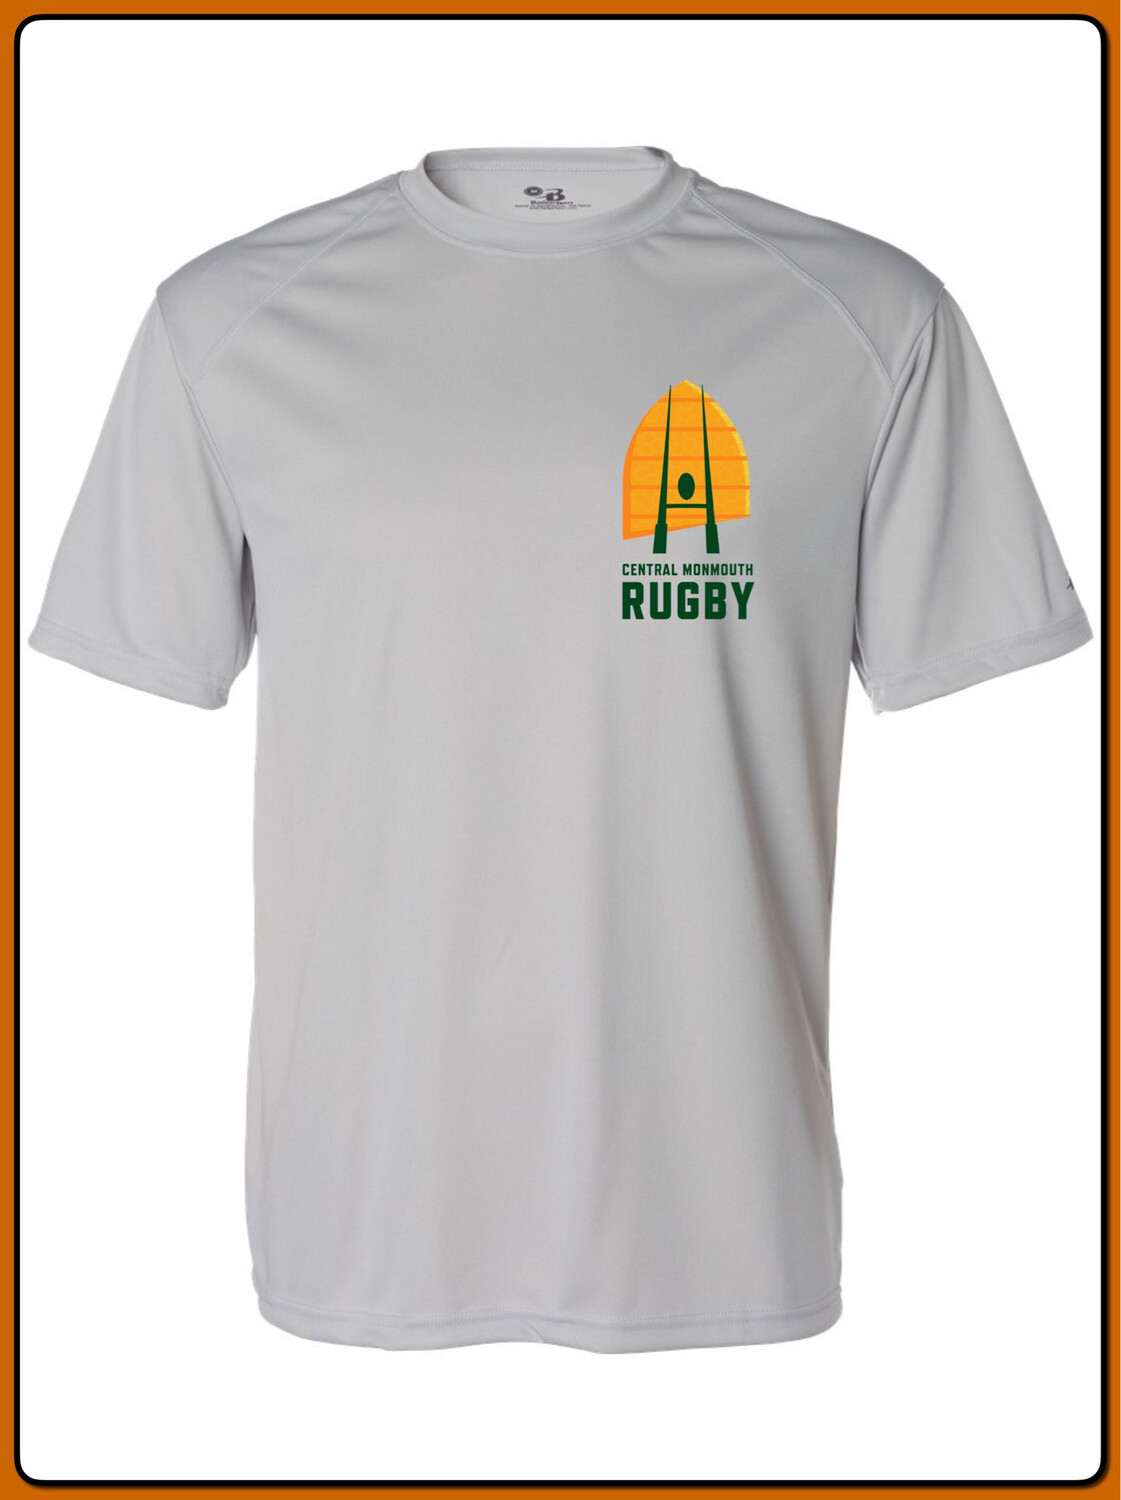 Central Monmouth Rugby Grey DRIFIT T Shirt - Badger Adult &amp; Youth